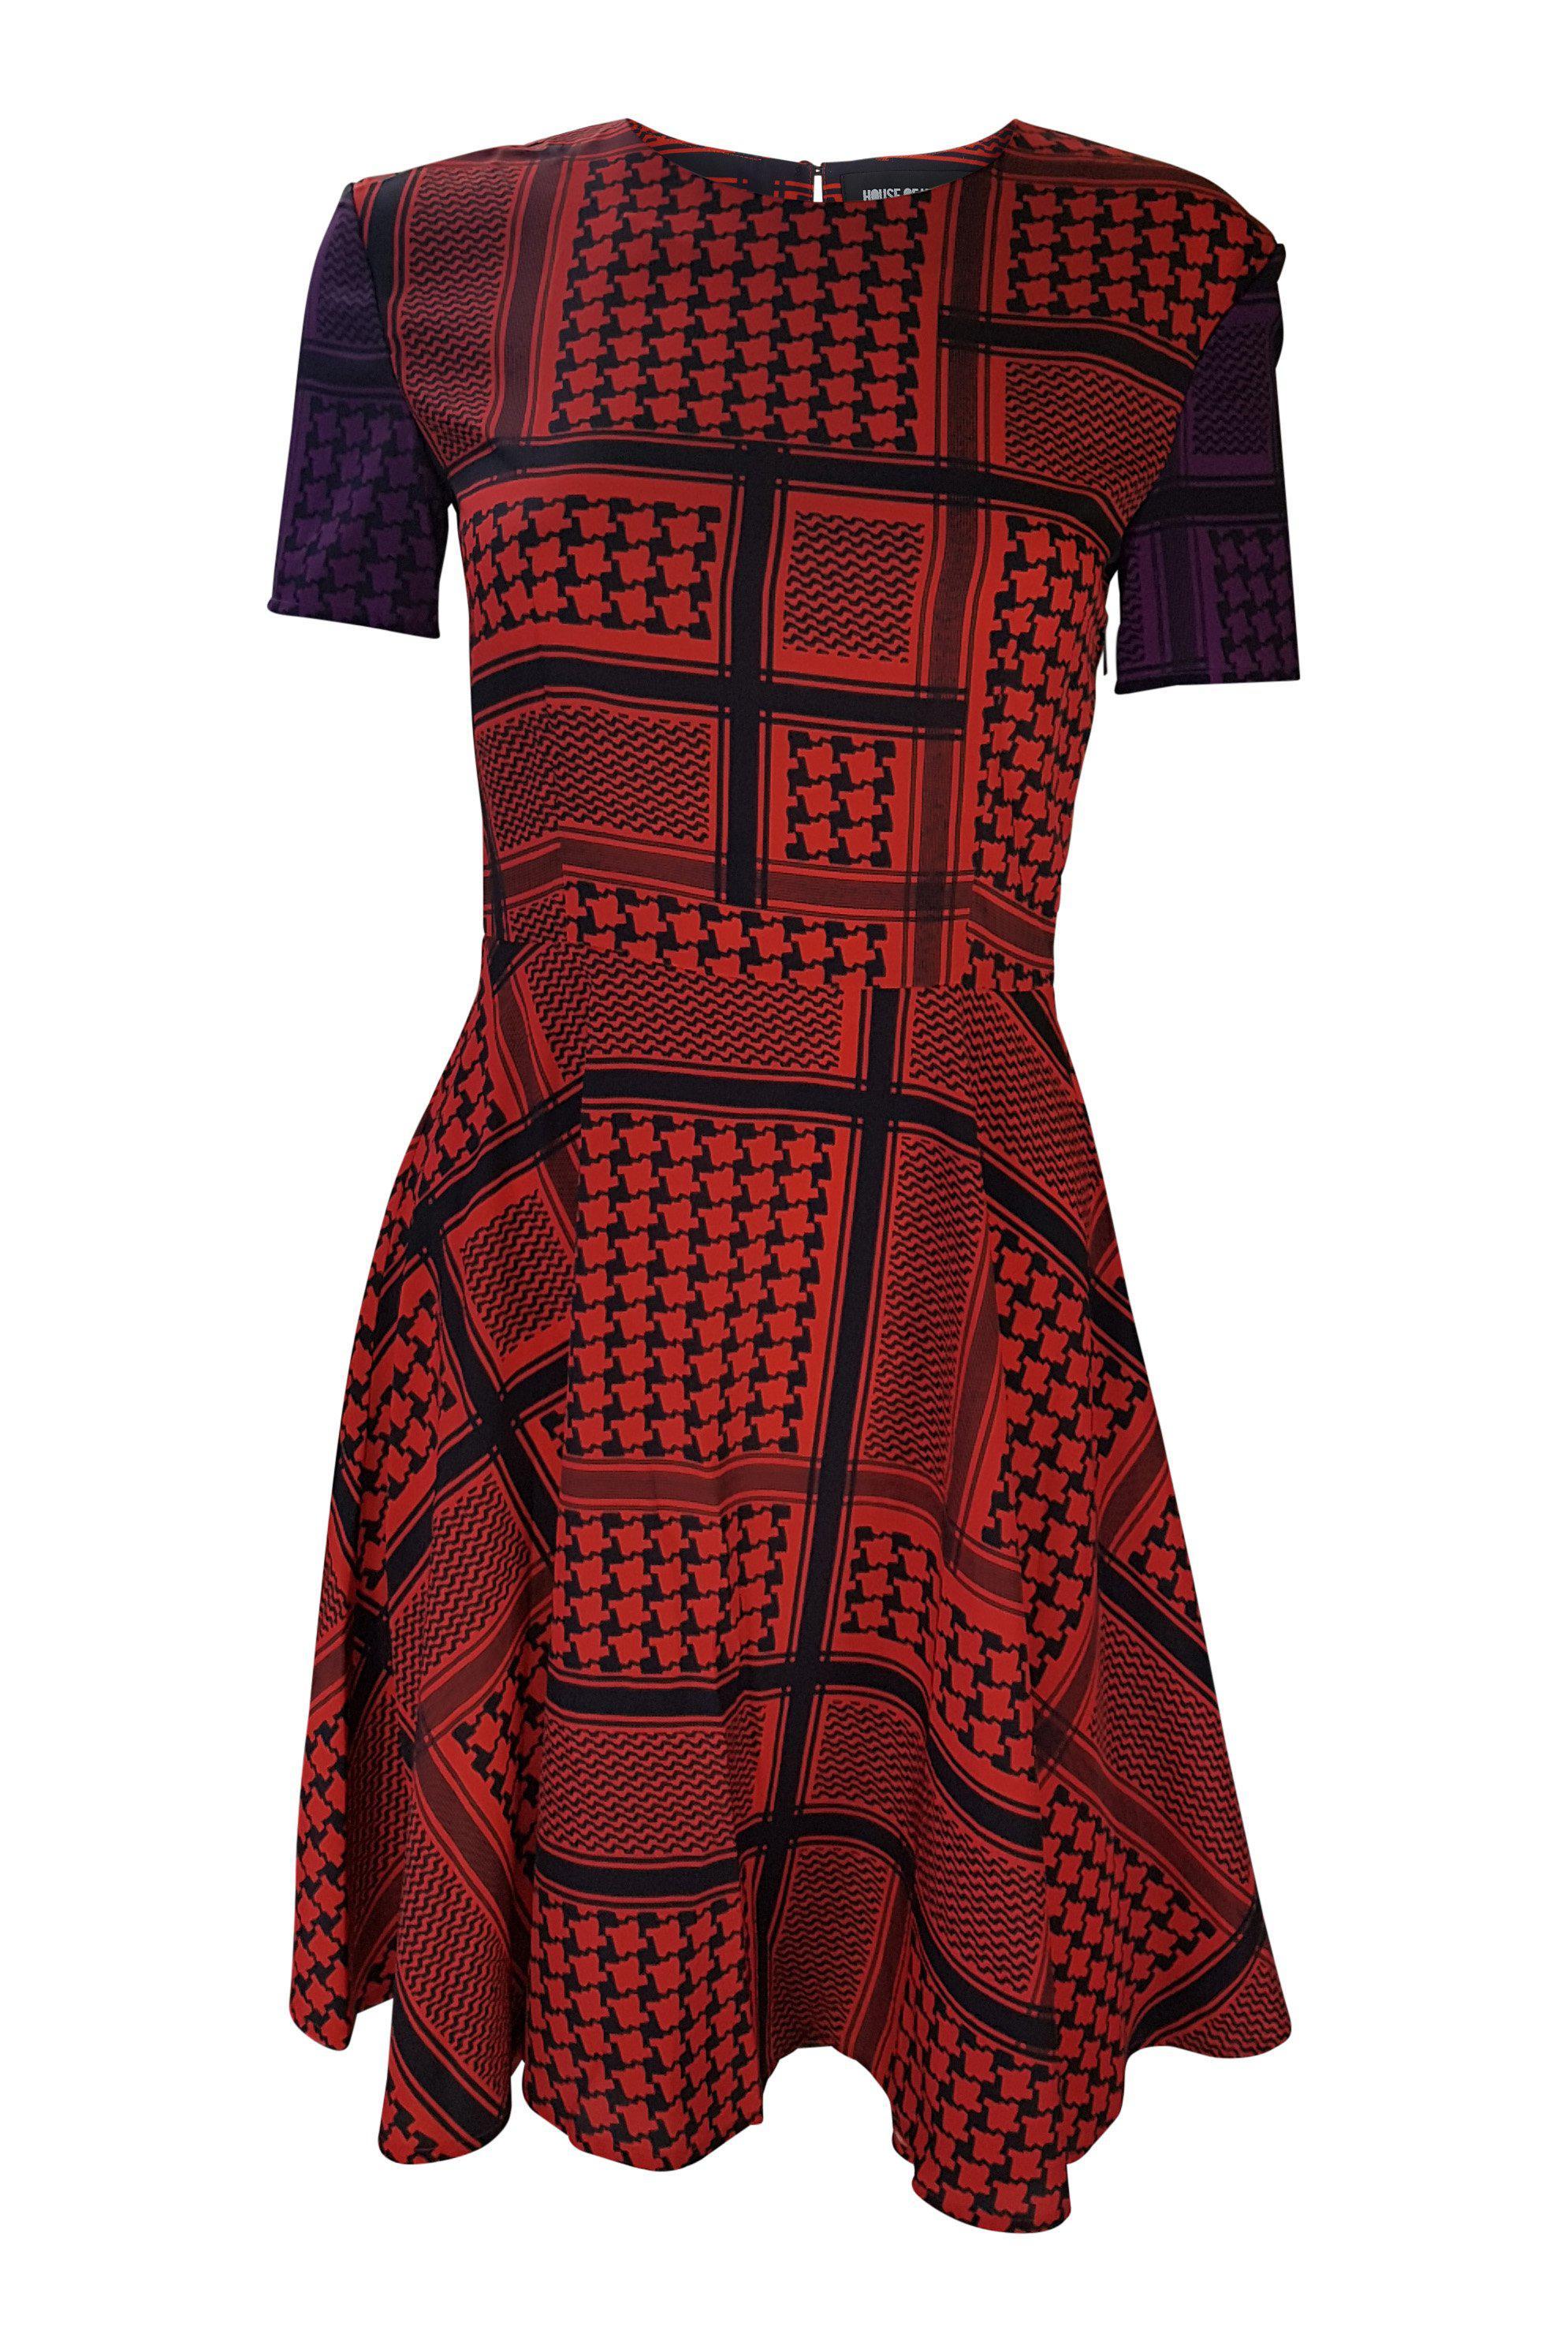 HOUSE OF HOLLAND Red Geometric Print Skater Dress (8)-House of Holland-The Freperie